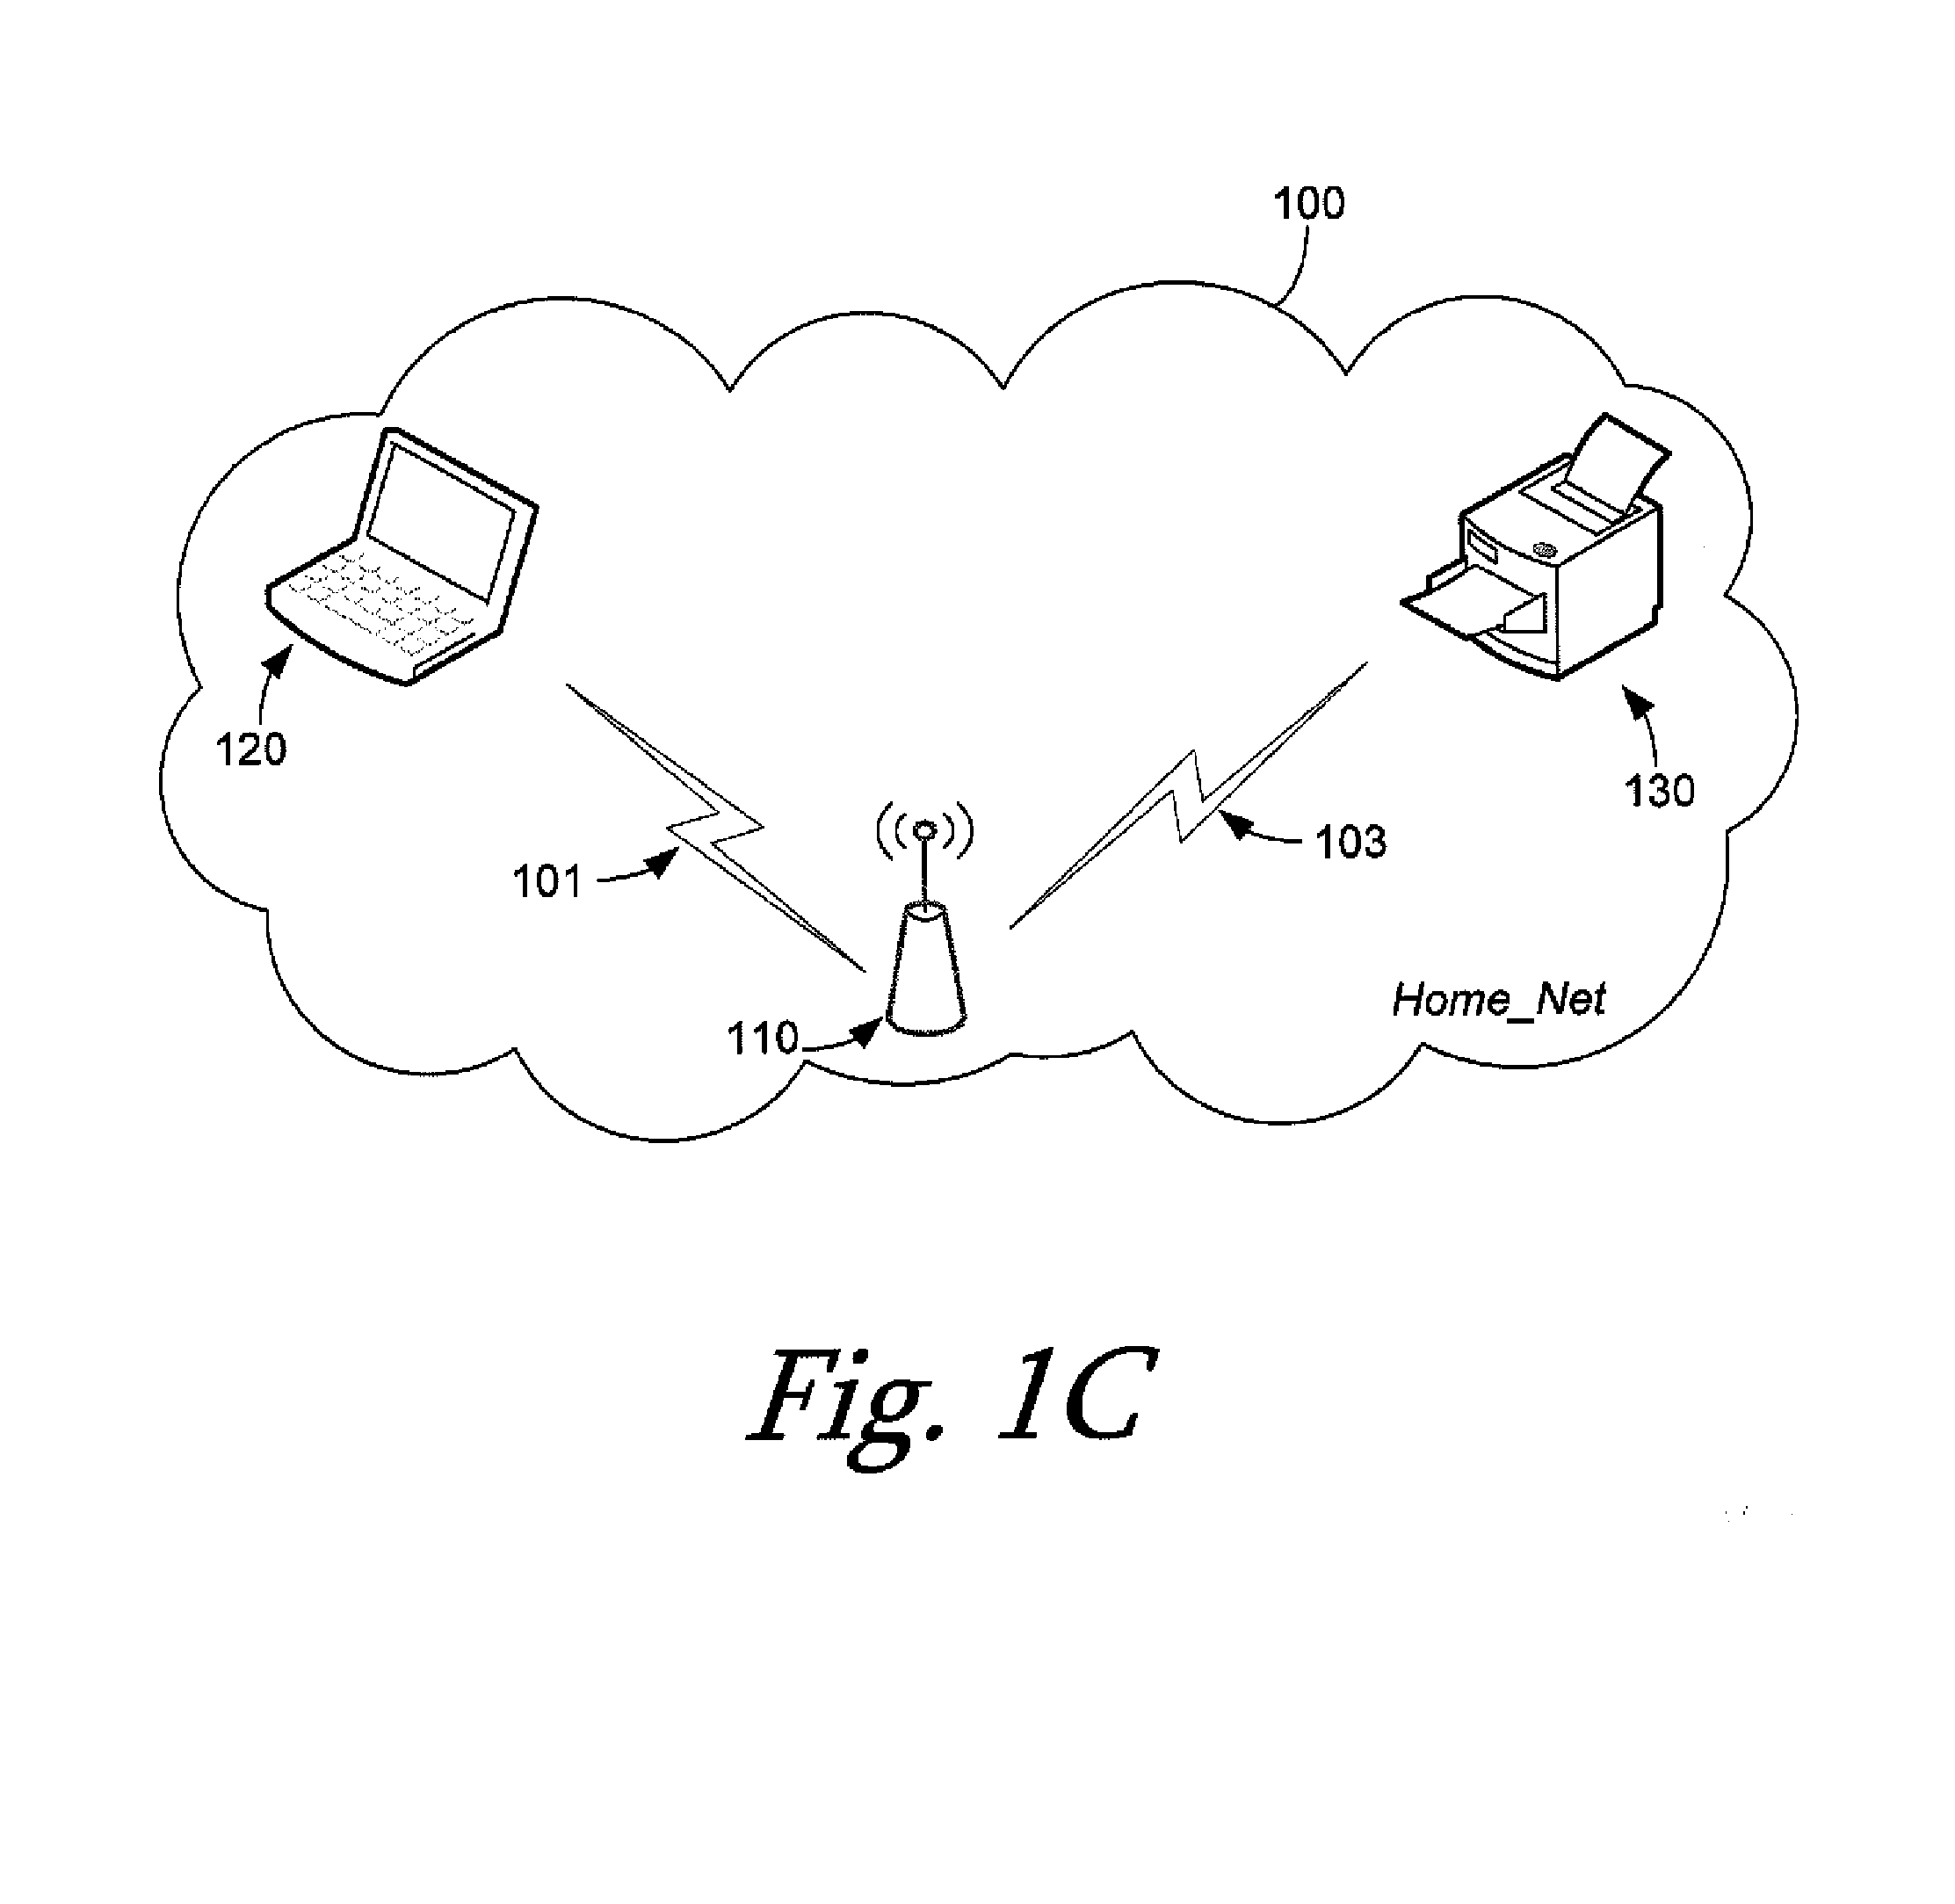 Wireless provisioning a device for a network using a soft access point